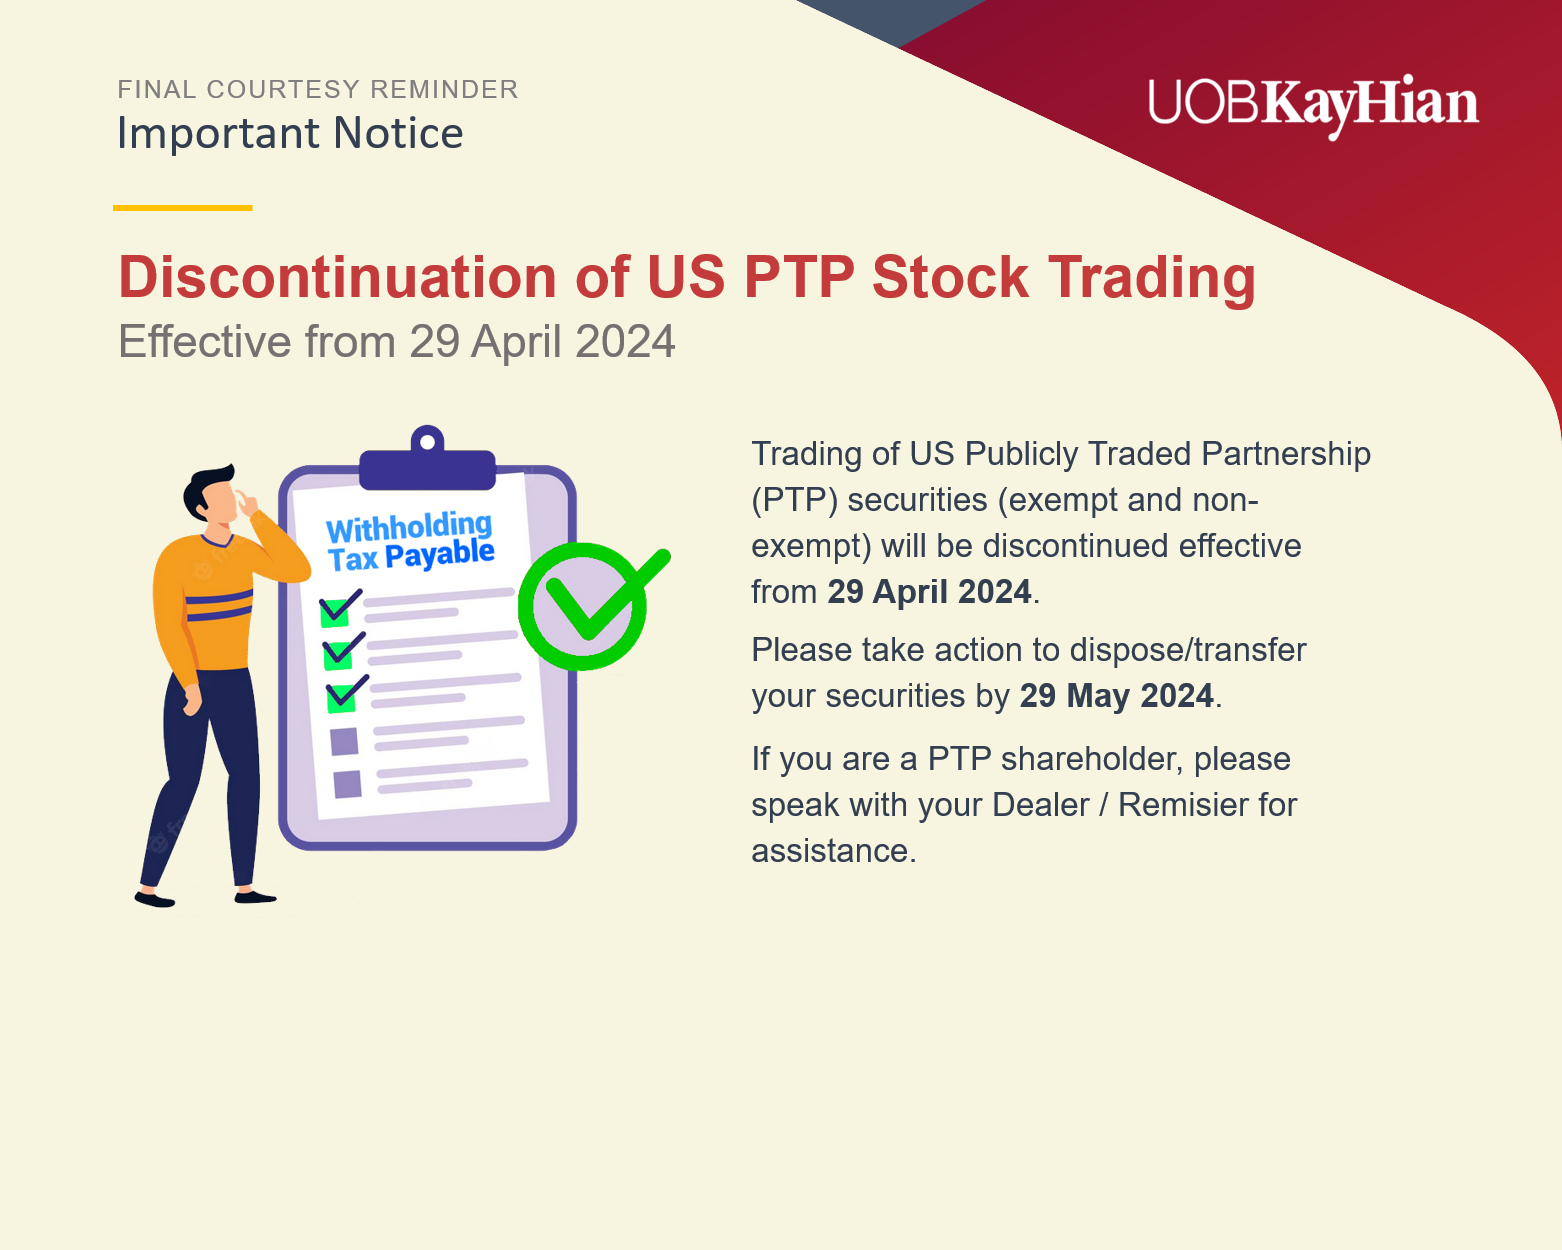 Discontinuation of US PTP Stock Trading